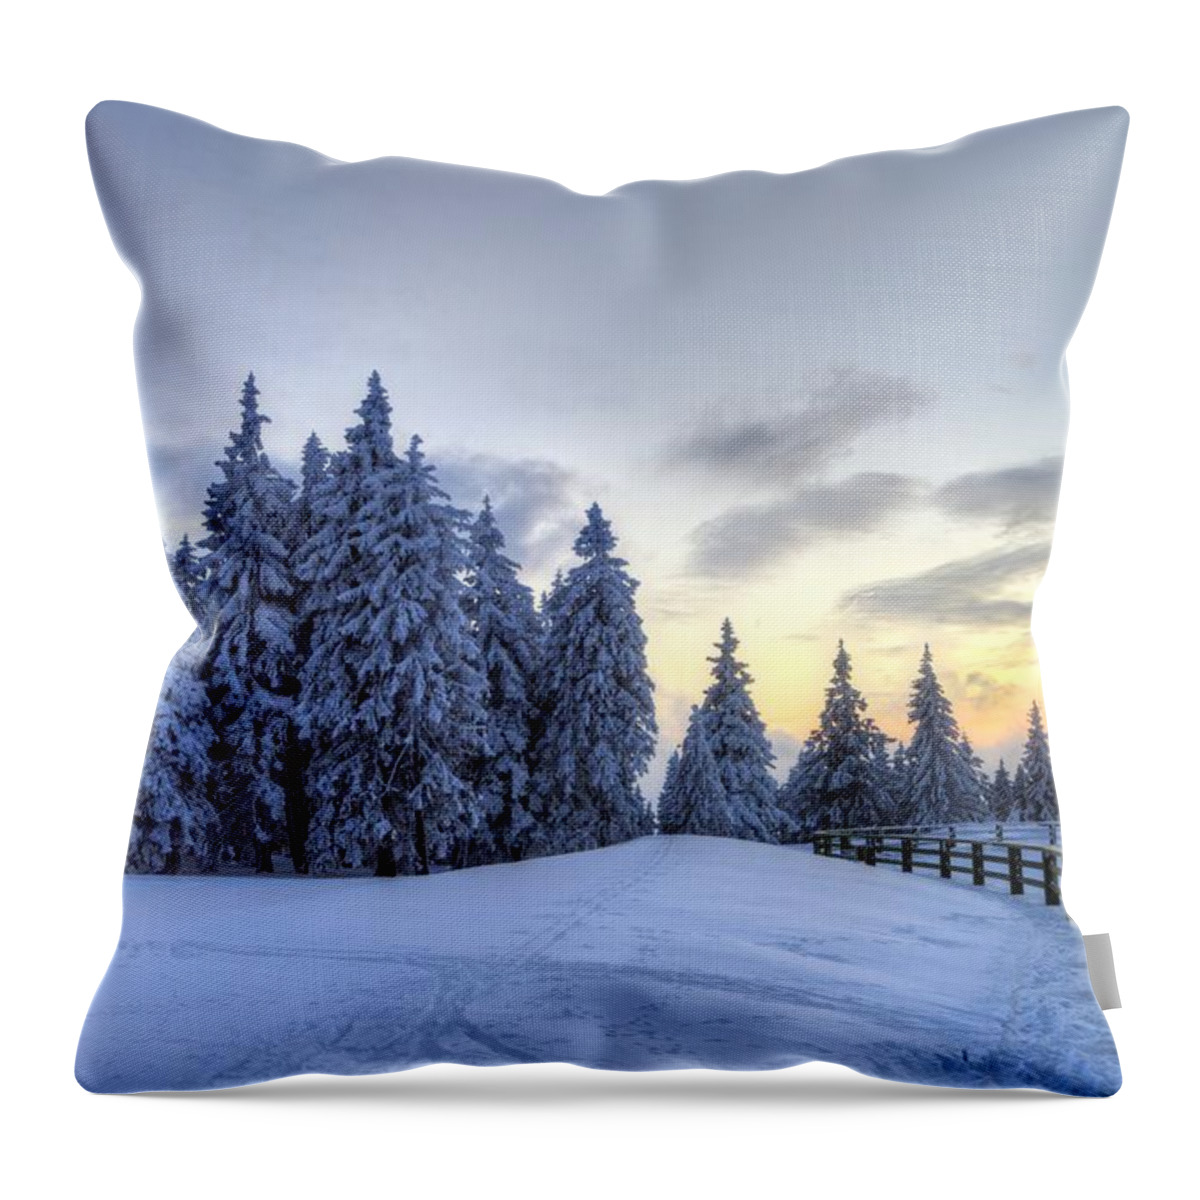  Throw Pillow featuring the photograph Winter #2 by Ivan Slosar